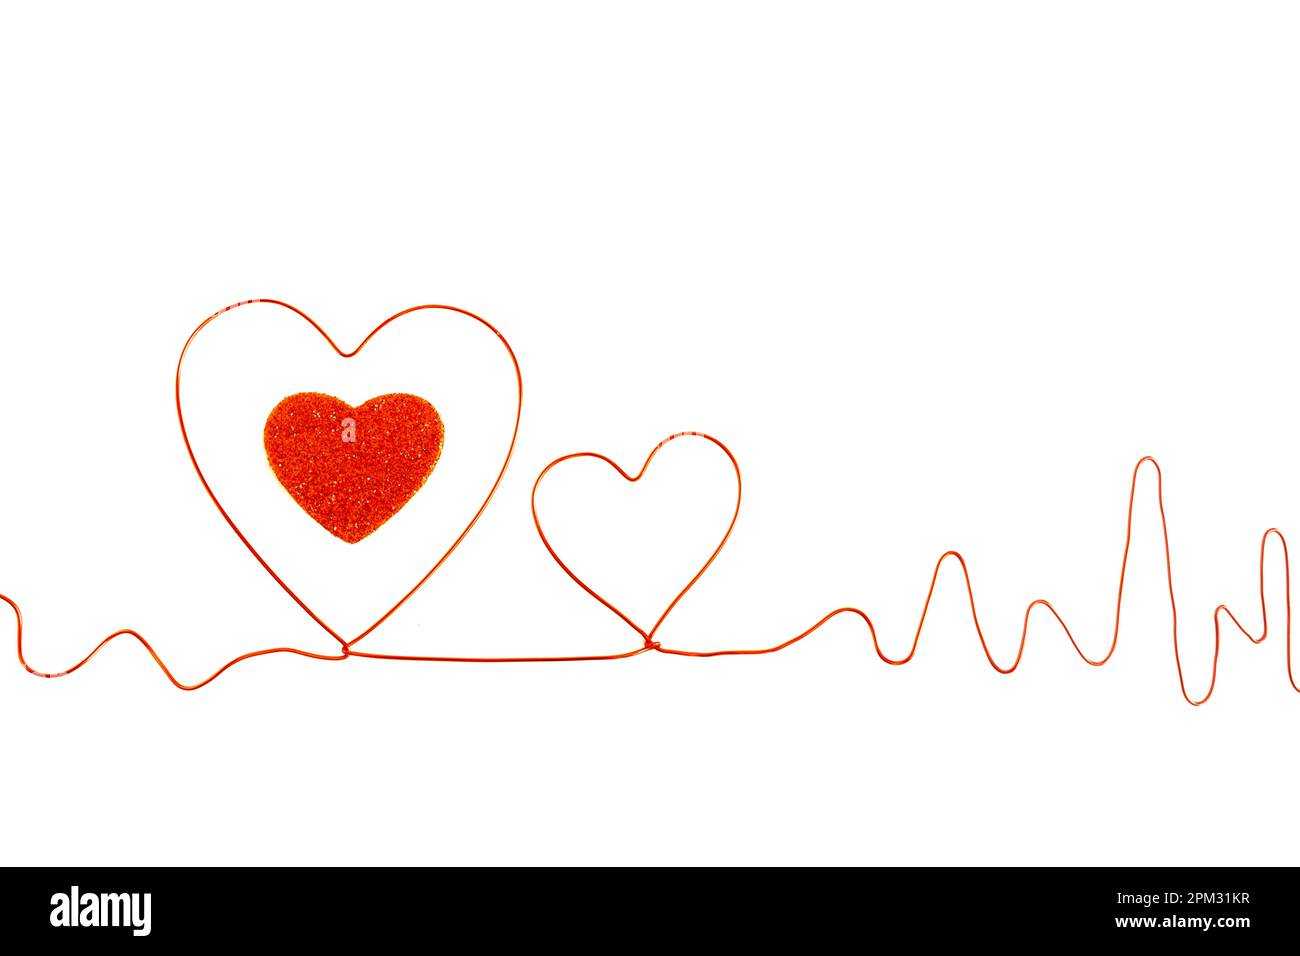 Electrocardiogram, ECG made of red wire making silhouettes of two hearts, one smaller than the other, in the big heart there is a red glitter heart on Stock Photo